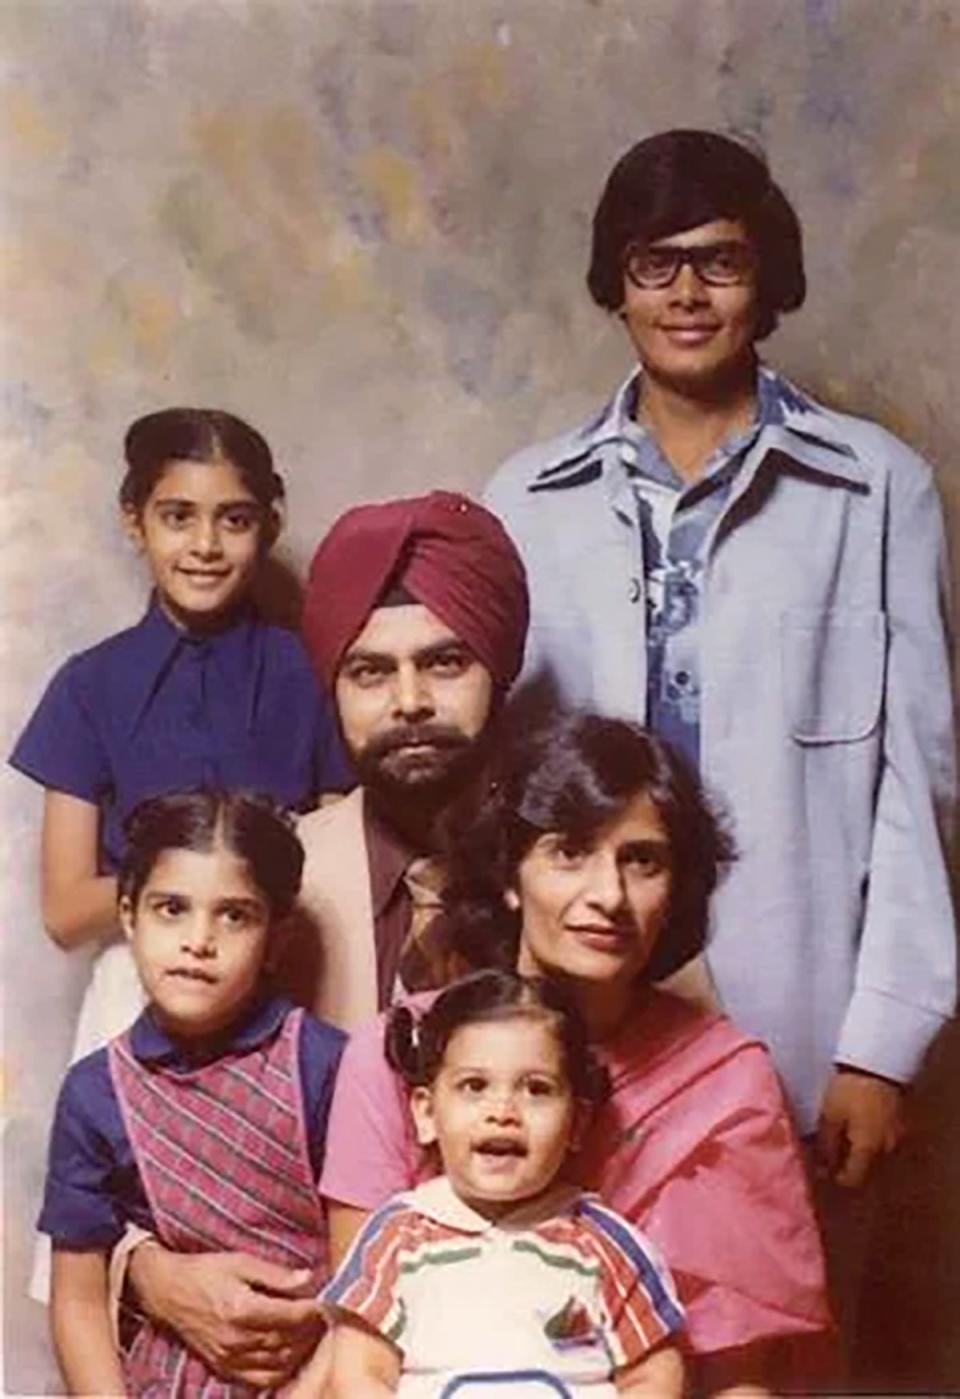 The Randhawa family were tight-knit as the only Indian family in rural Bamberg County (Supplied)